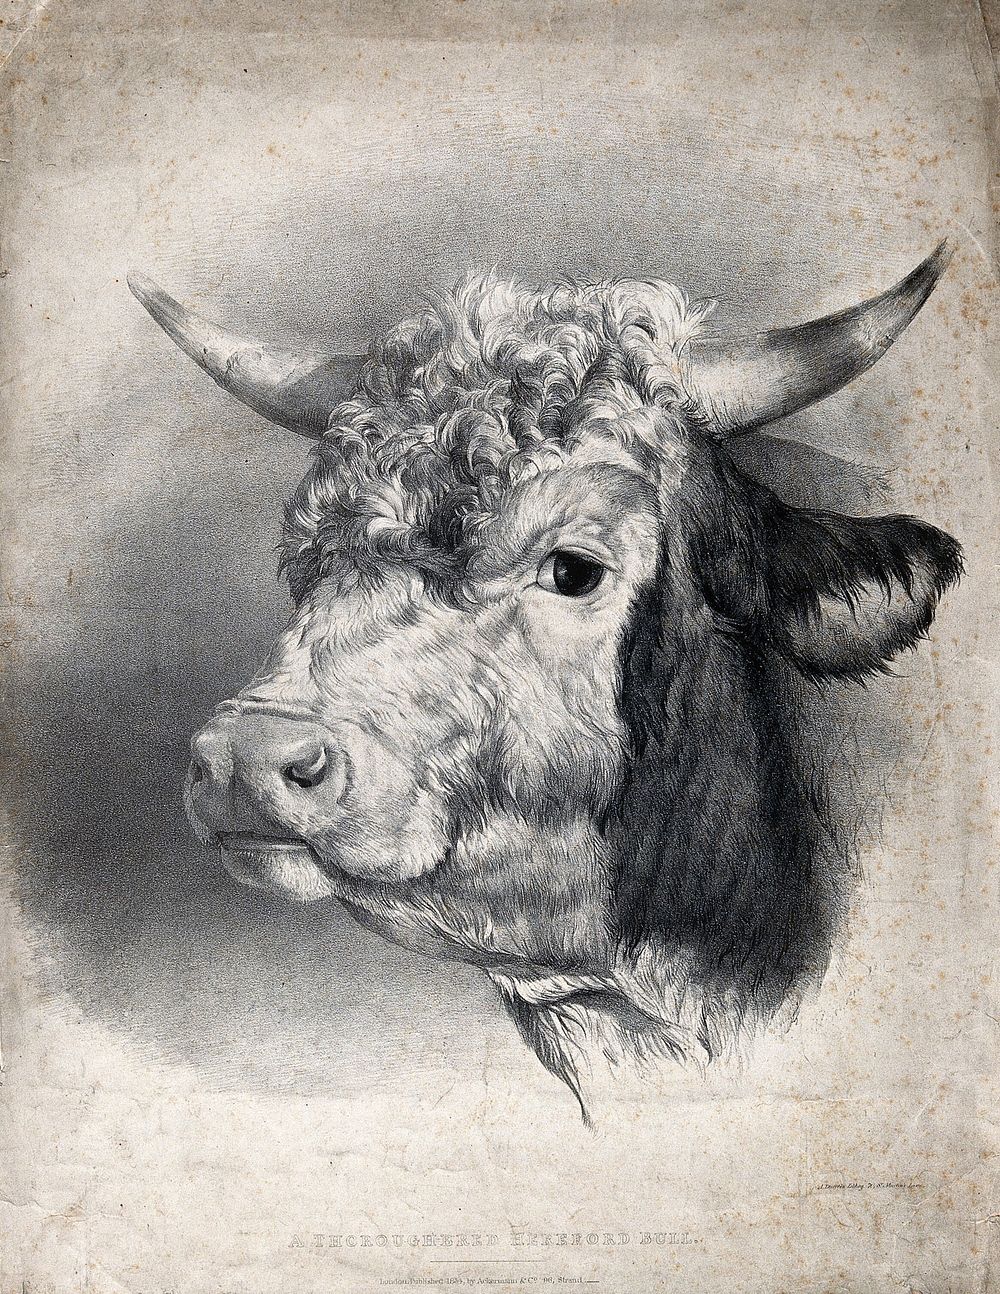 The head of a thoroughbred Hereford bull. Lithograph by A. Ducote, 1834.